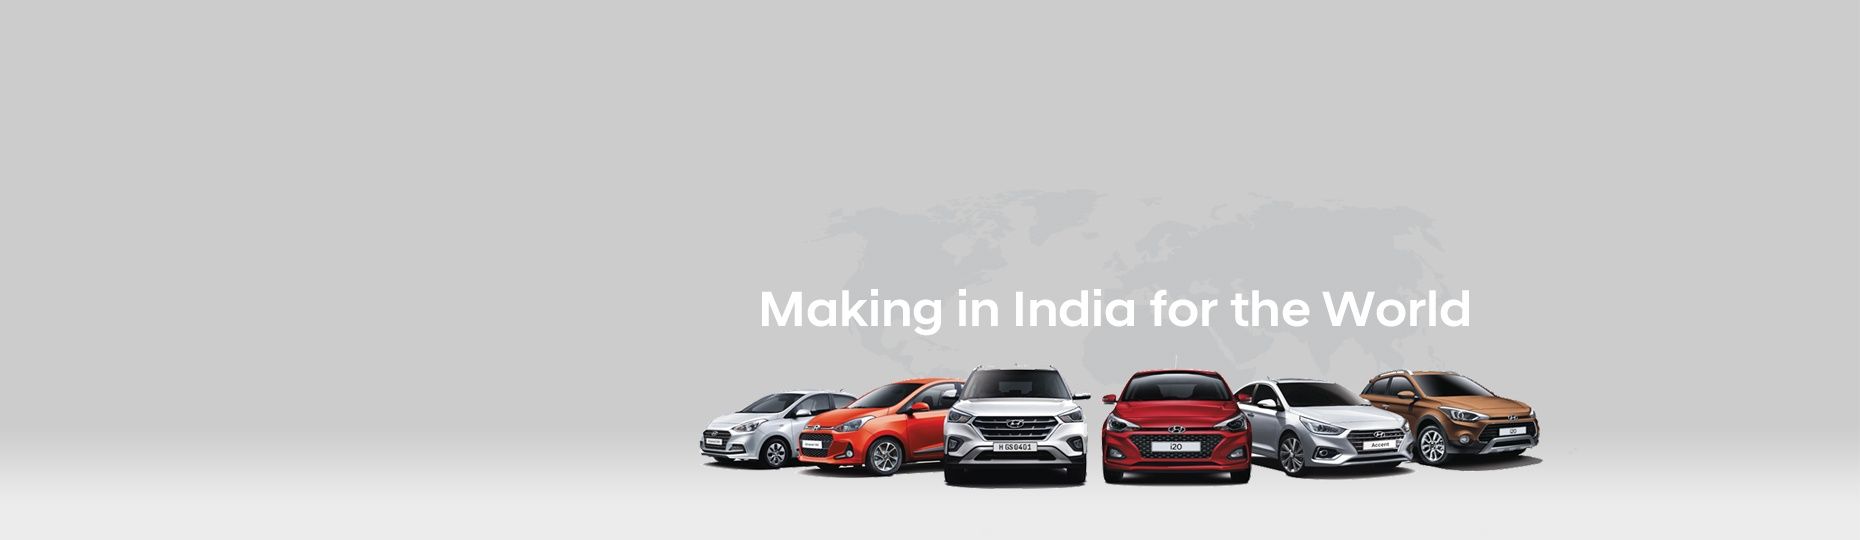 Making in India for the world